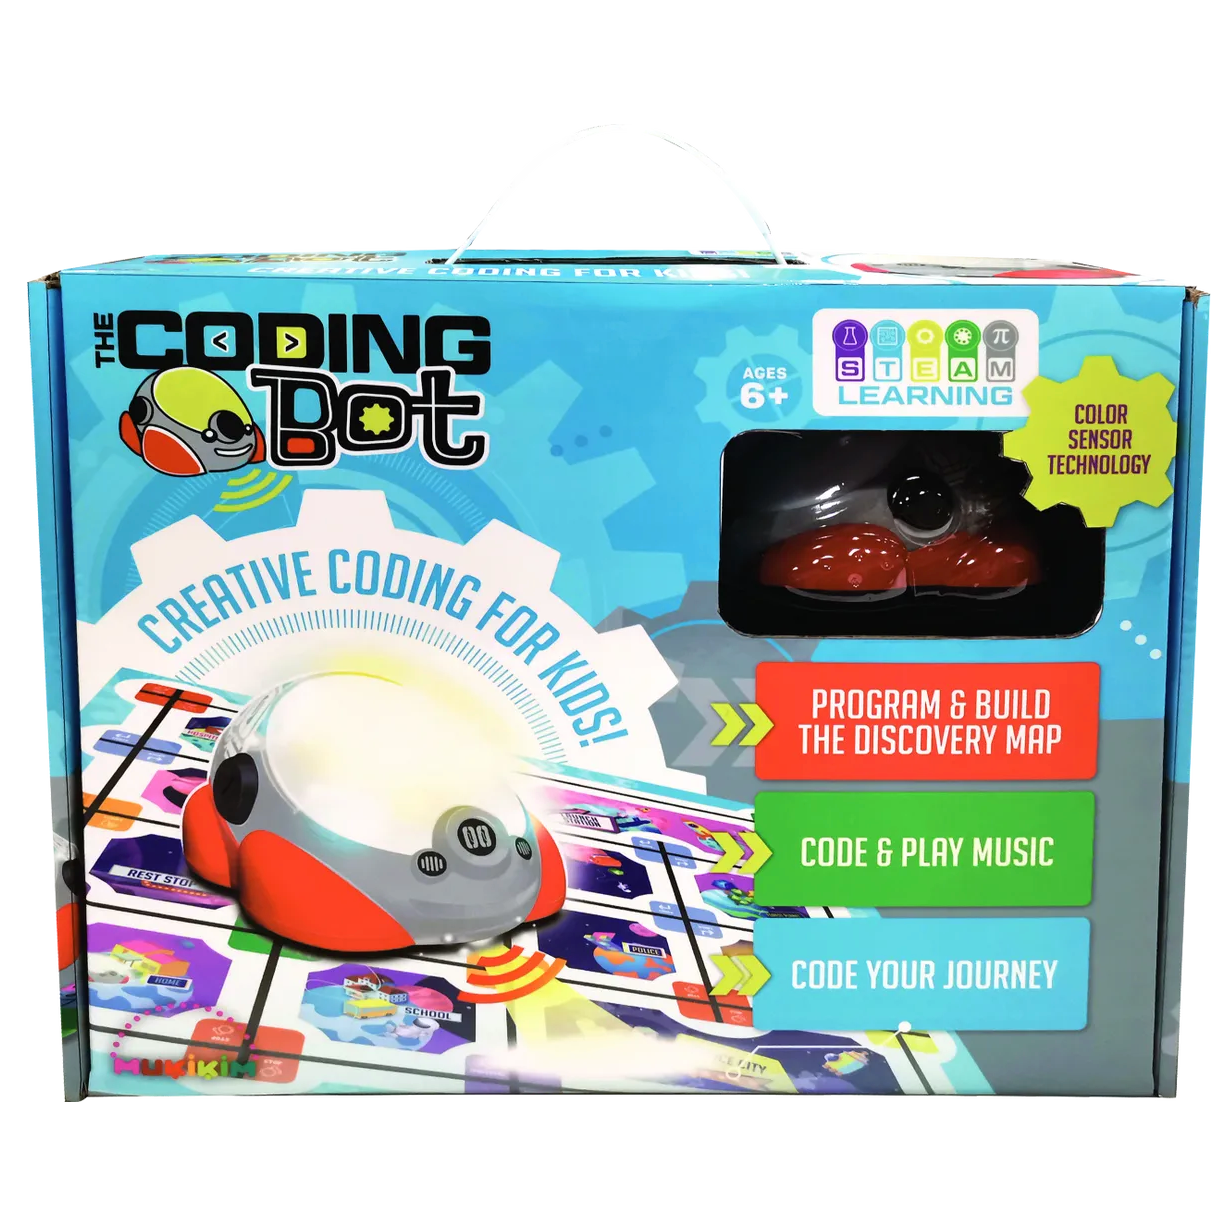 The Coding Bot